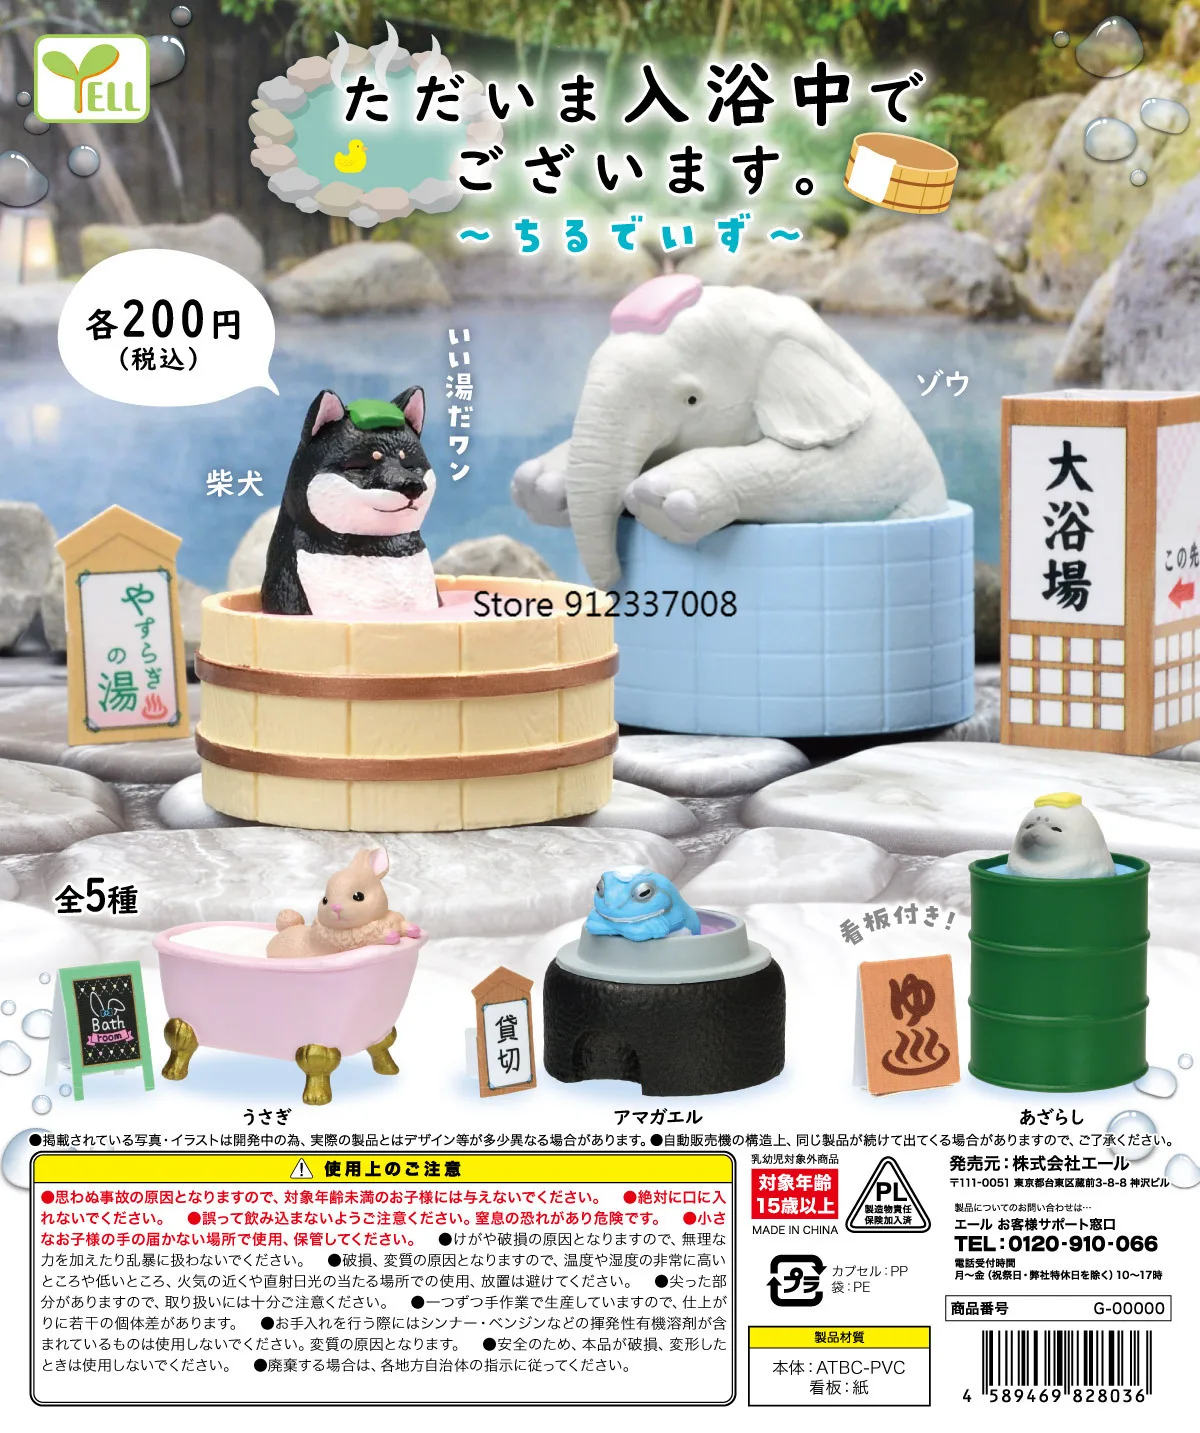 

YELL Capsule Toys Animal Action Figures Doll Gashapon Elephant Dog Frog Rabbit Gacha We Are Taking A Bath In The Cold Weather